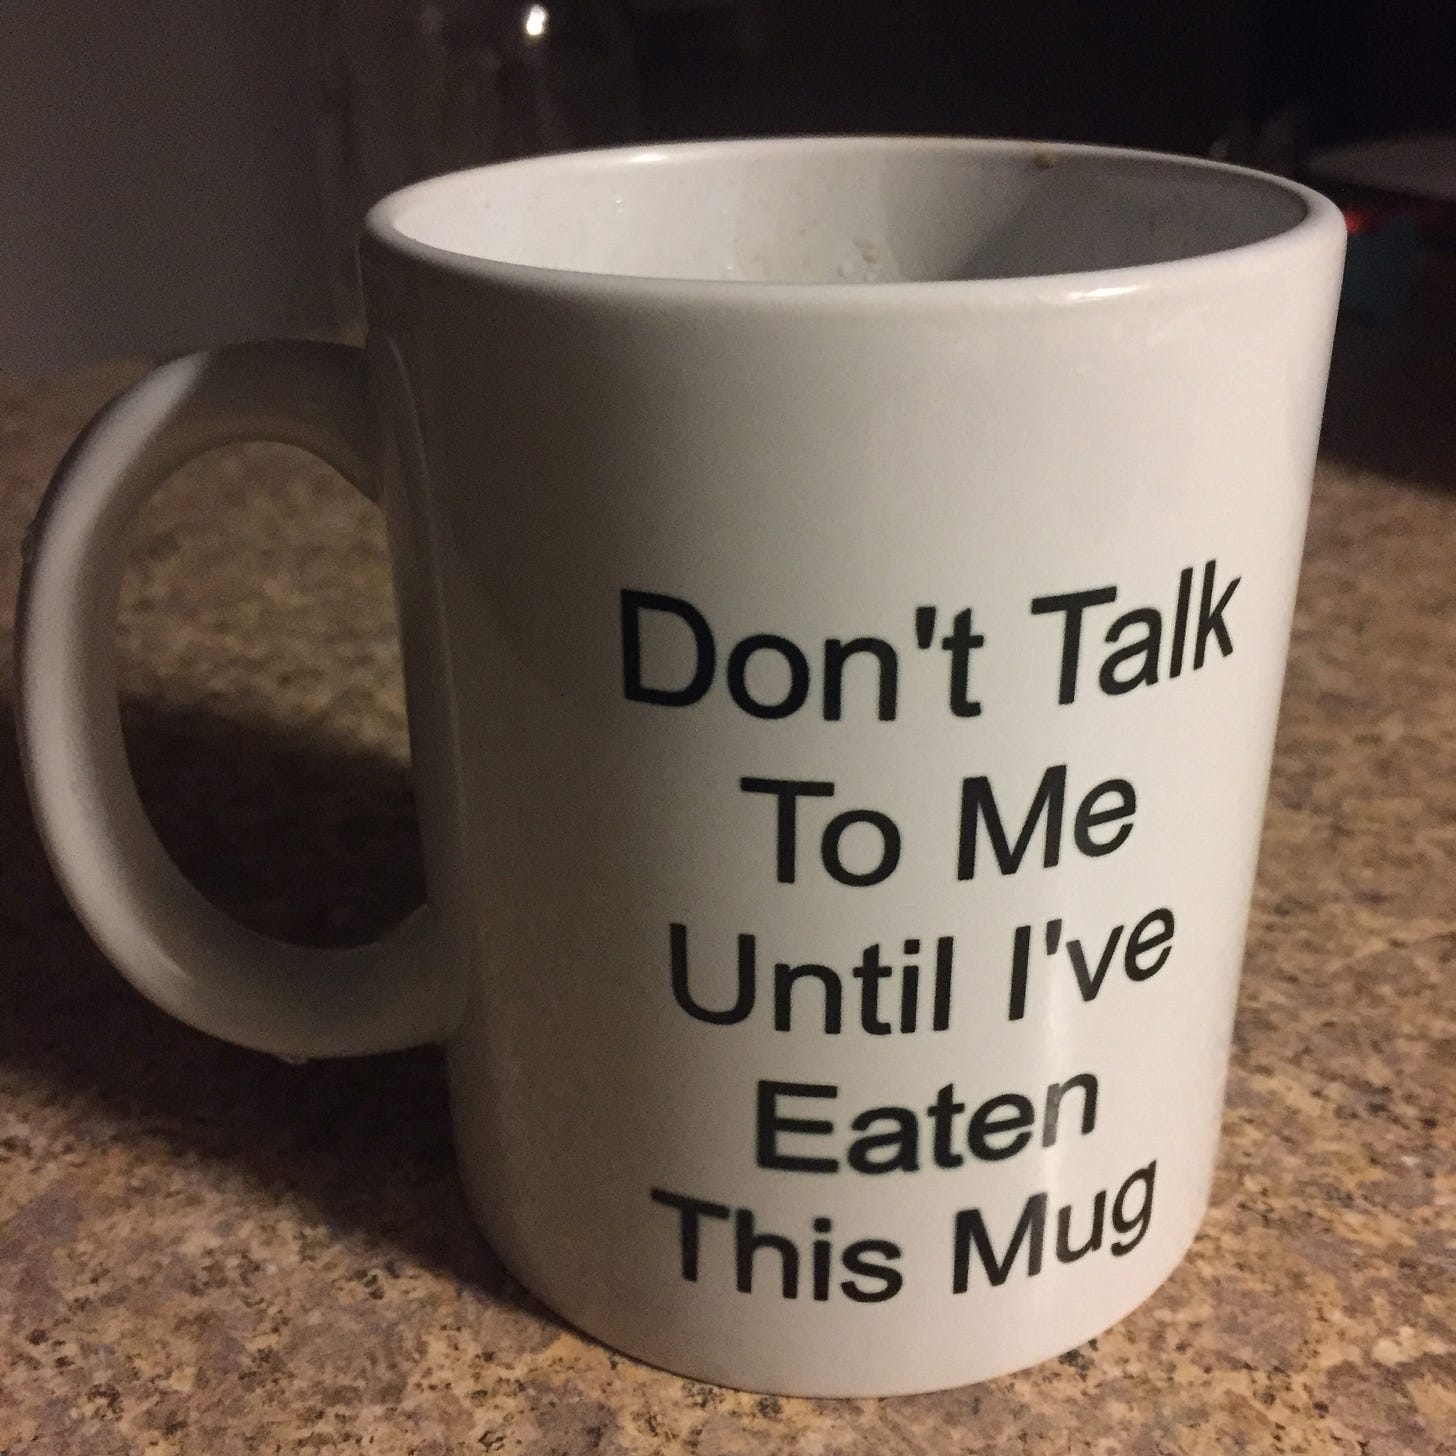 On a counter, a white mug in simple black text that reads "Don't talk to me until I've eaten this mug"